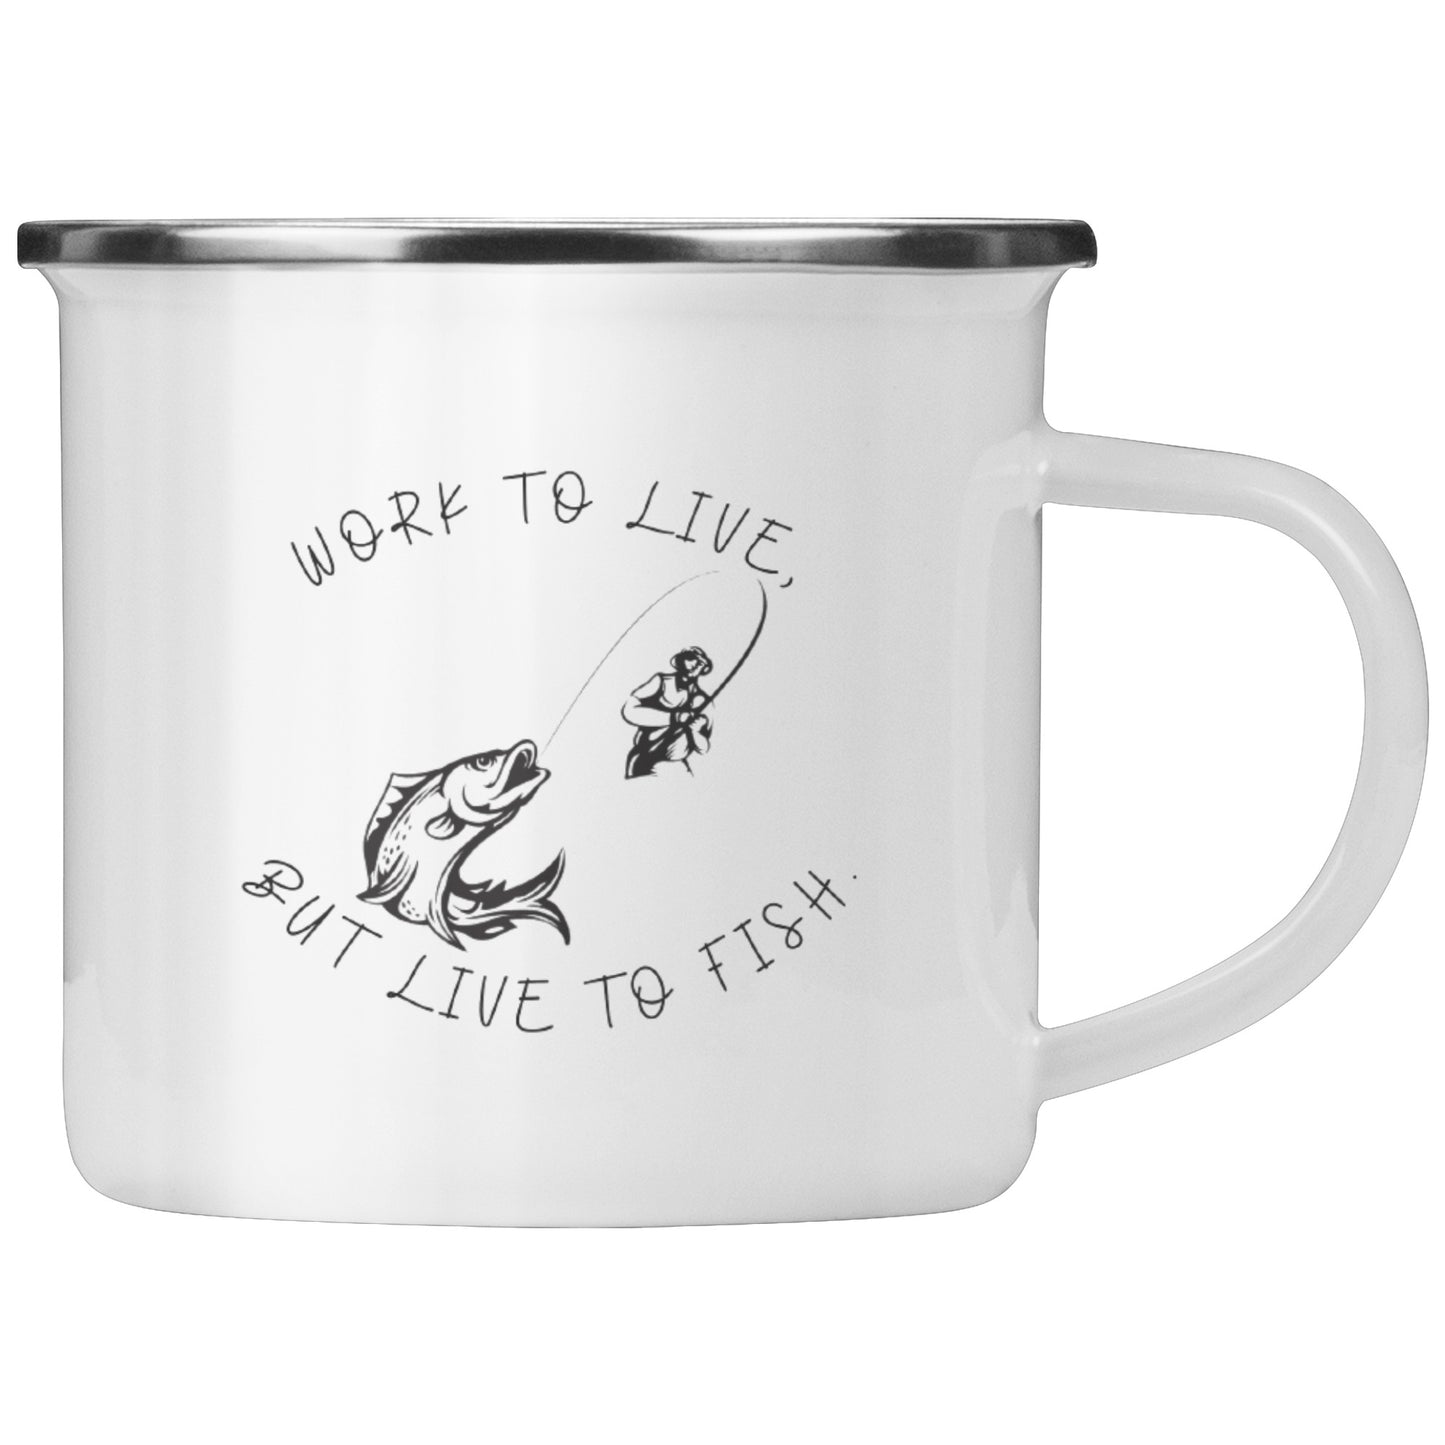 "Live To Fish" Camping Mug For The Outdoor Enthusiast